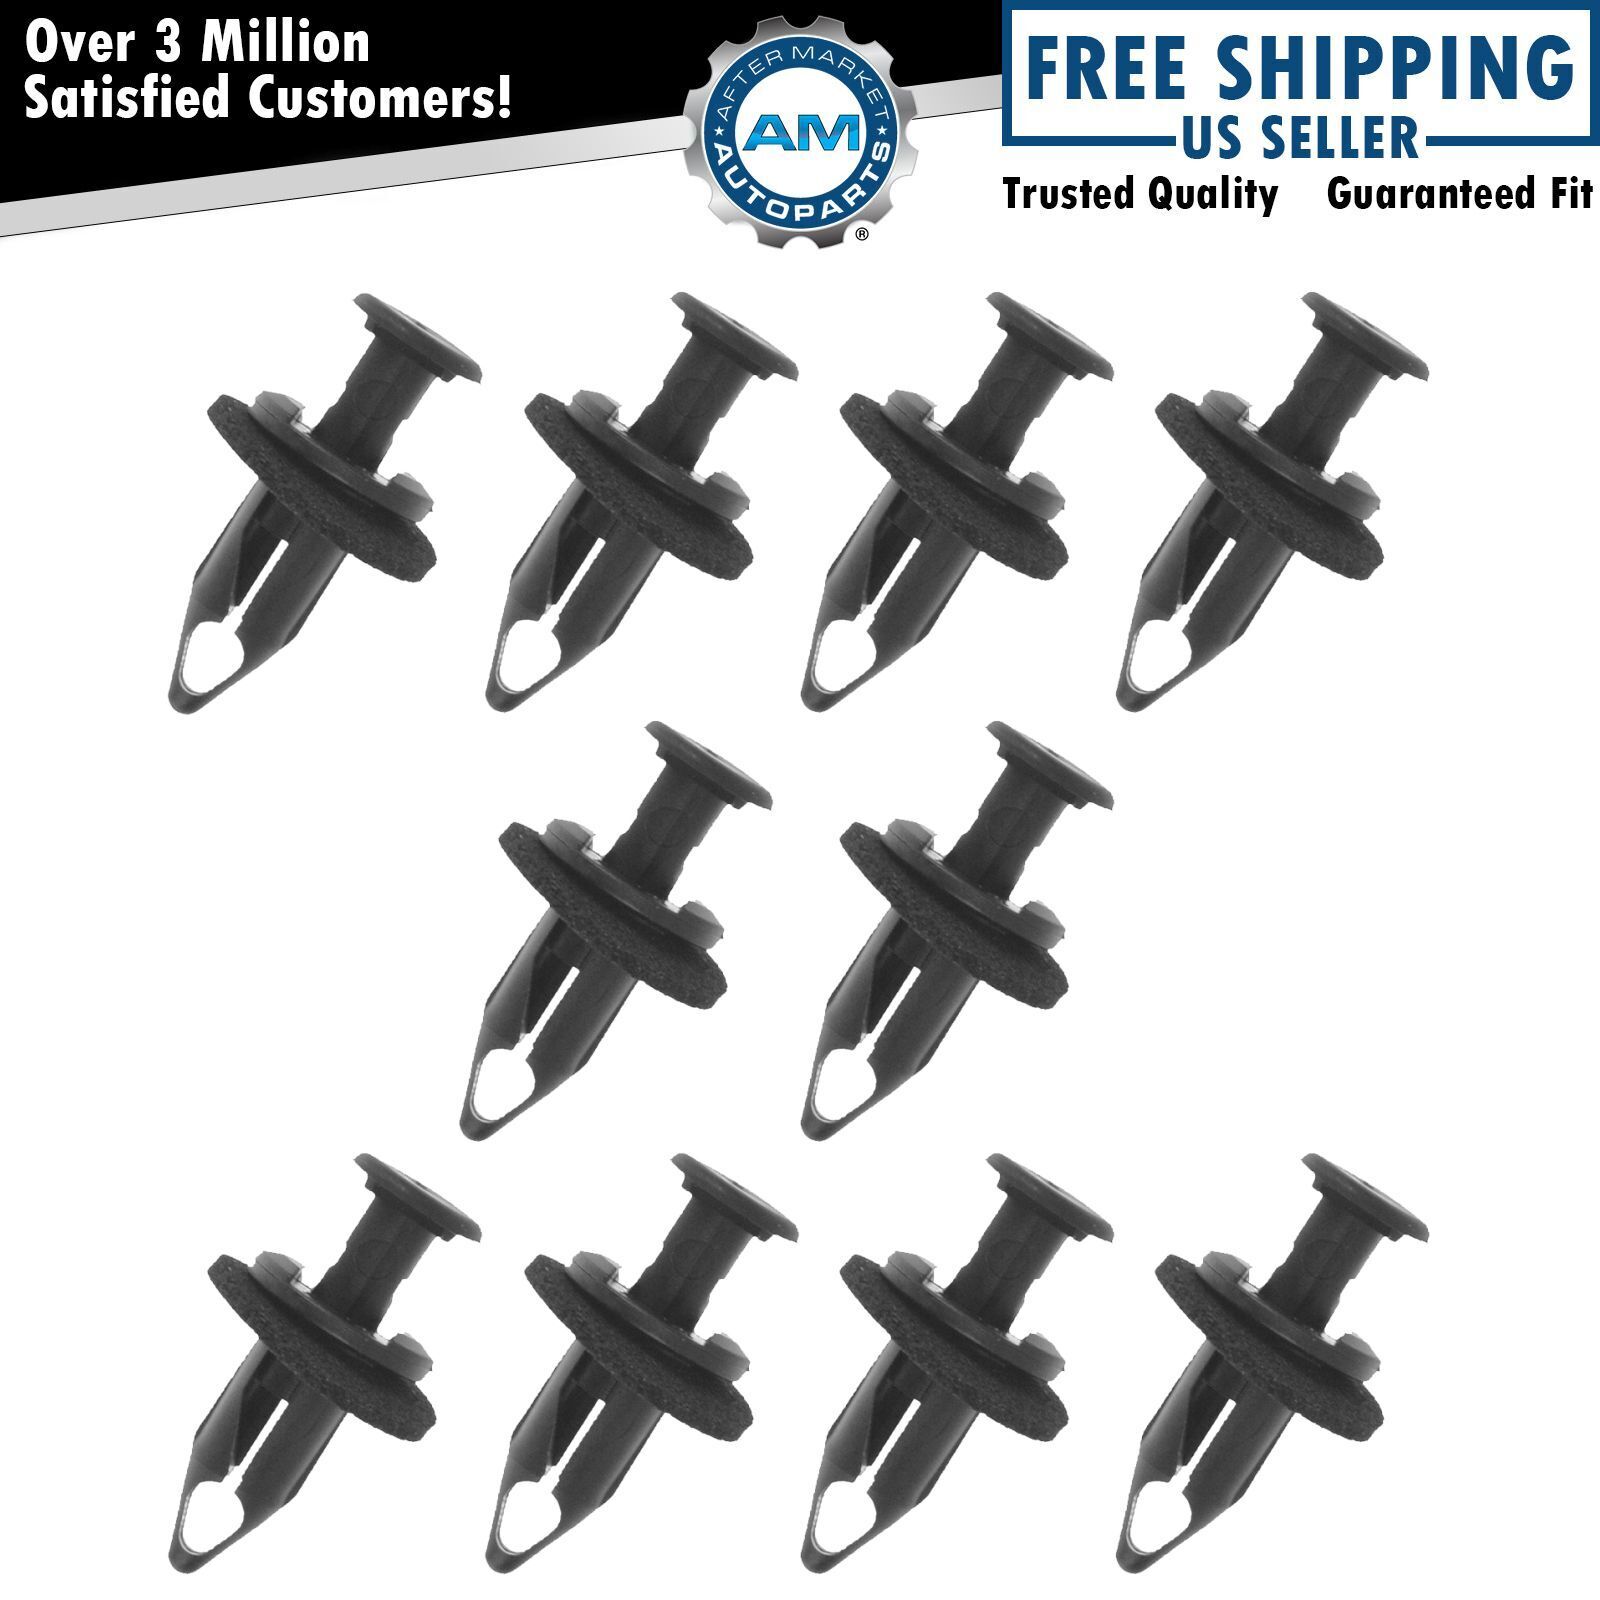 OEM 11561878 Retainer Clip Set of 10 for Chevy GMC Cadillac Buick Olds New